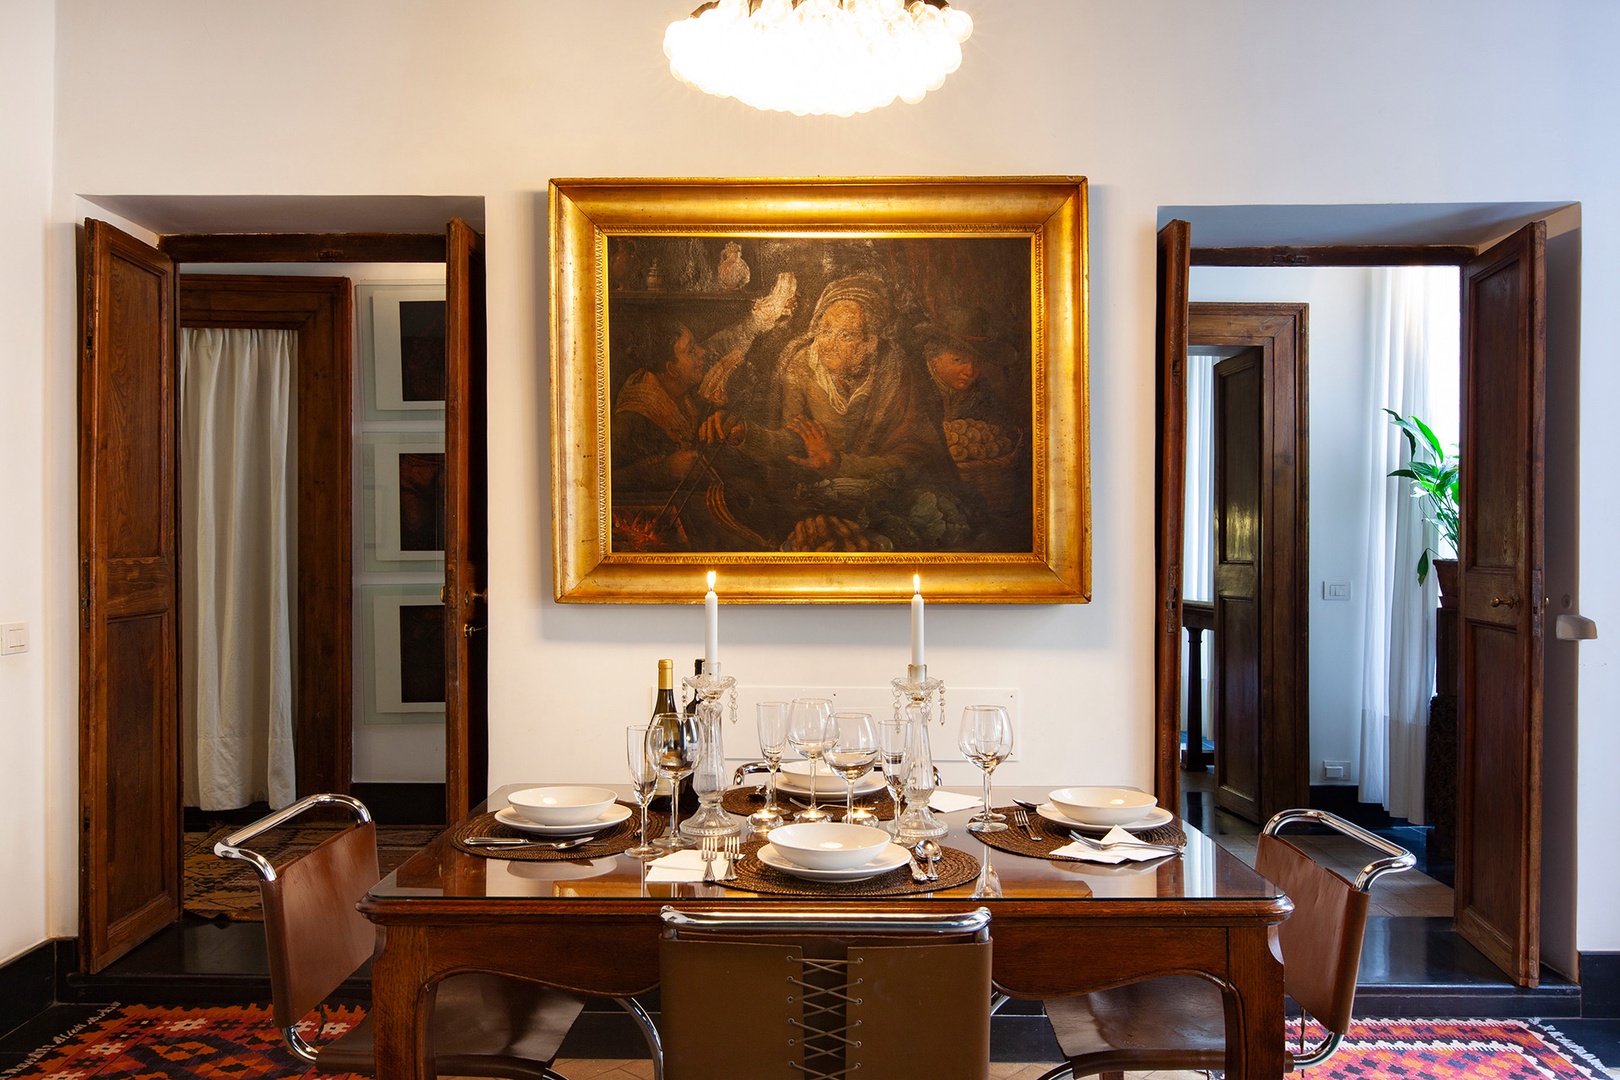 Refined artwork and tasteful antiques.